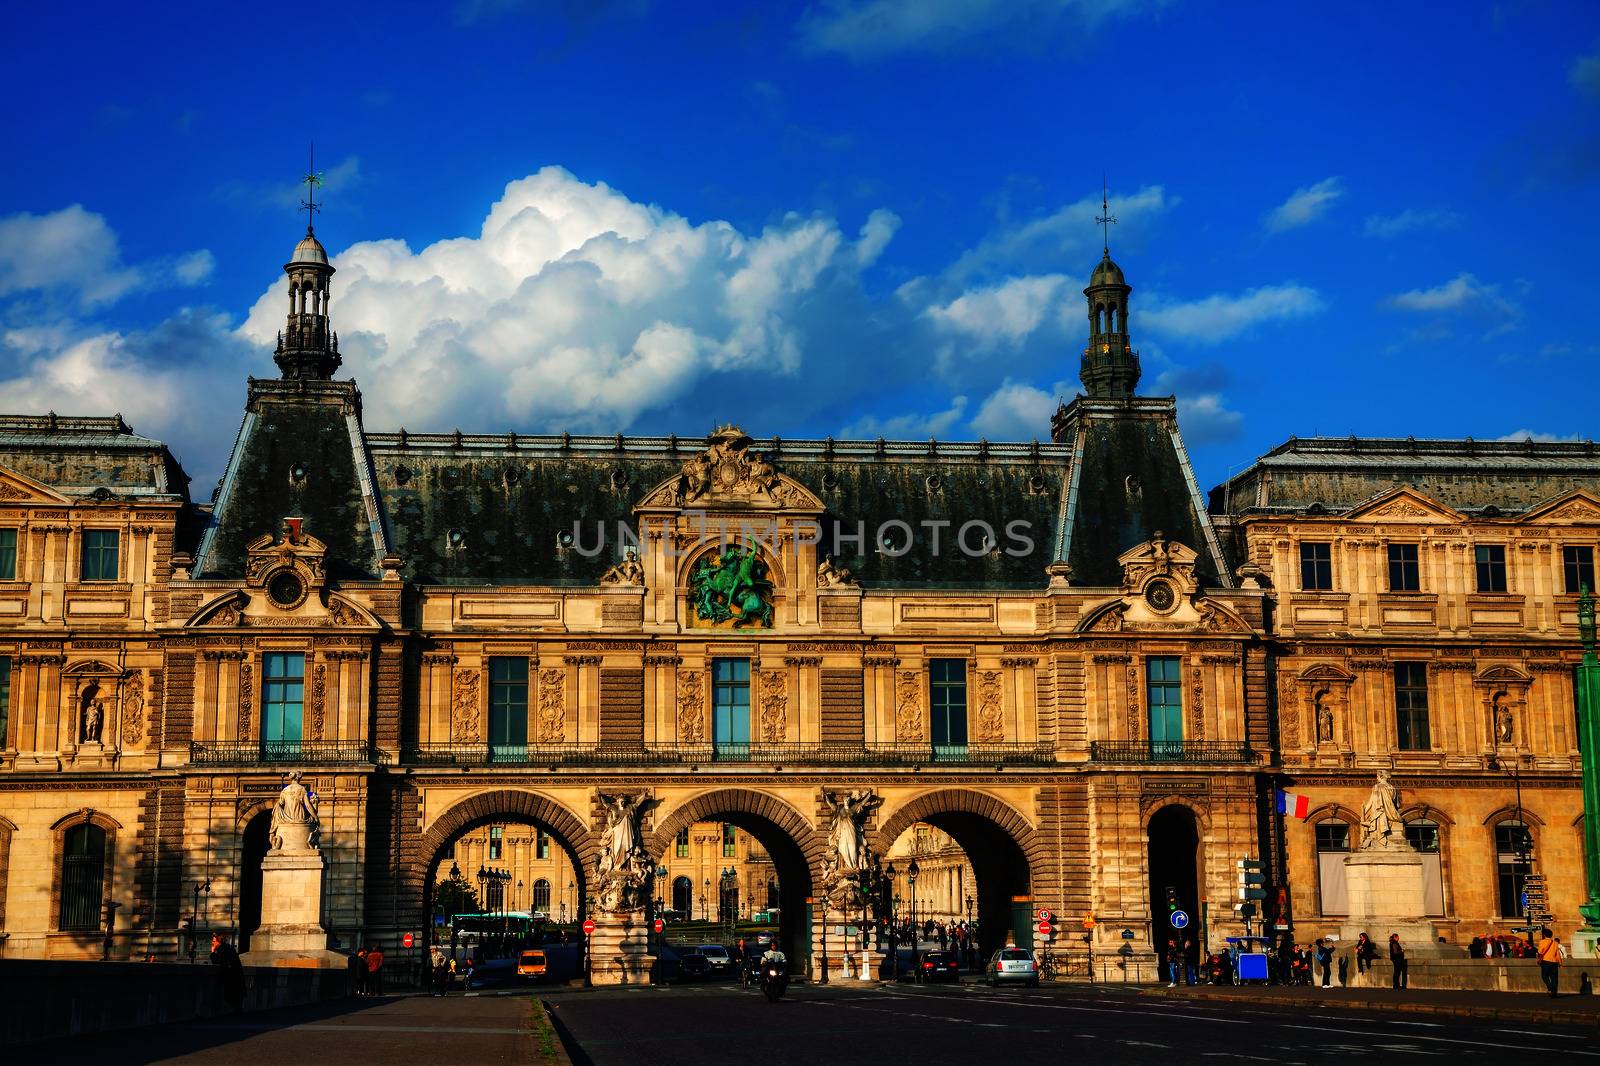 PARIS - OCTOBER 9: Entrance to the Louvre on October 9, 2014 in Paris, France. The Louvre Museum is one of the world's largest museums and a historic monument and a central landmark of Paris.